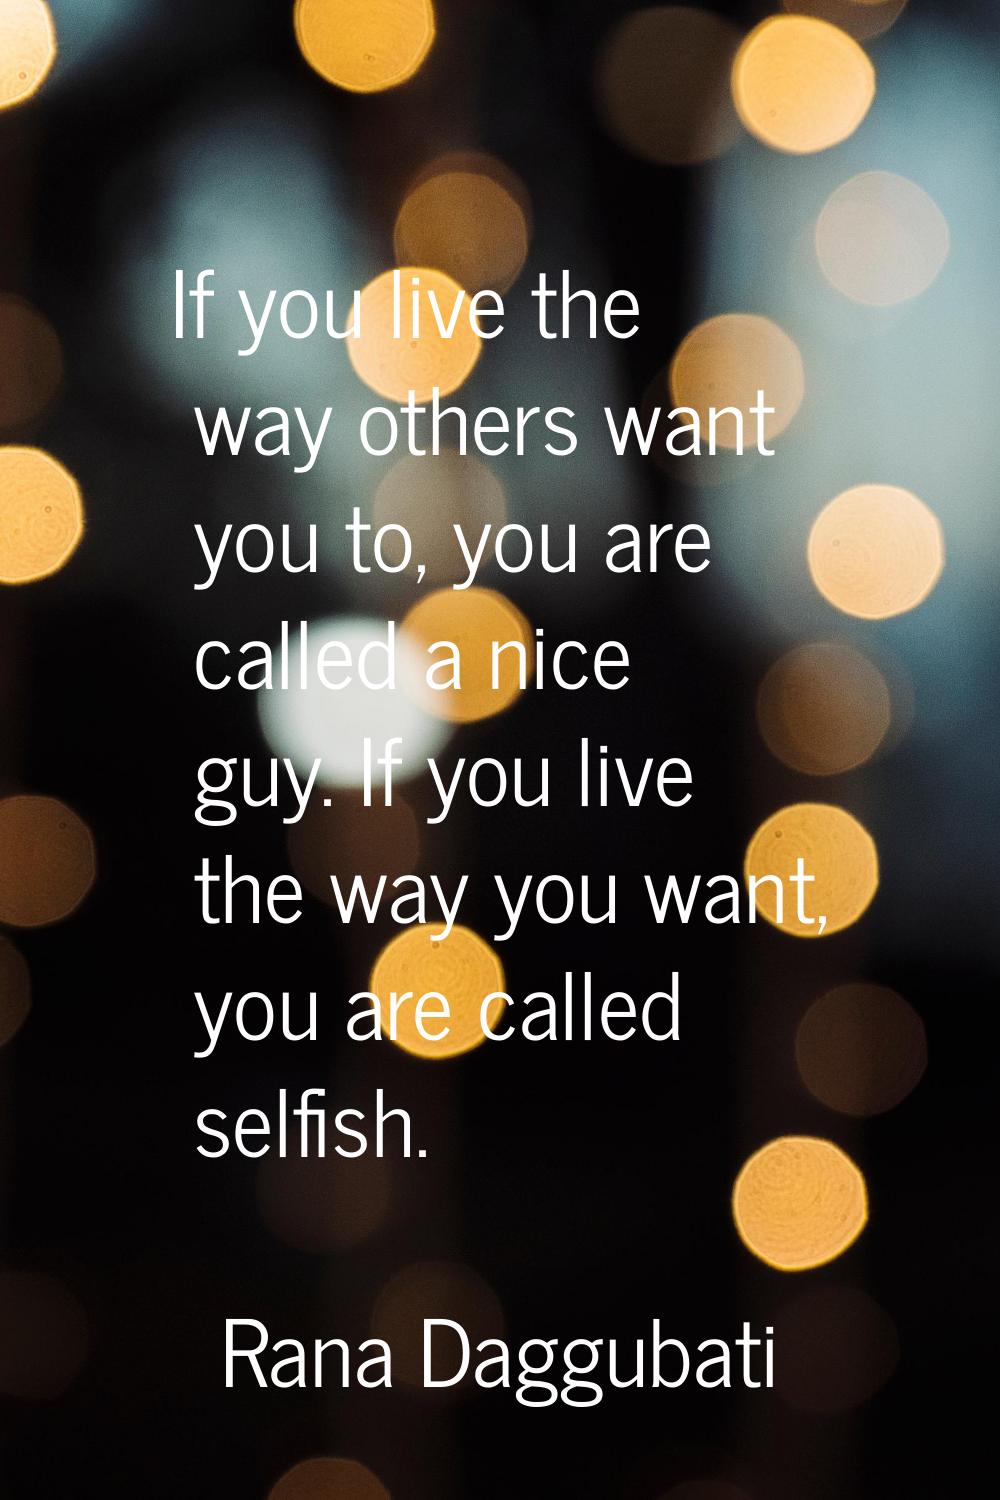 If you live the way others want you to, you are called a nice guy. If you live the way you want, yo